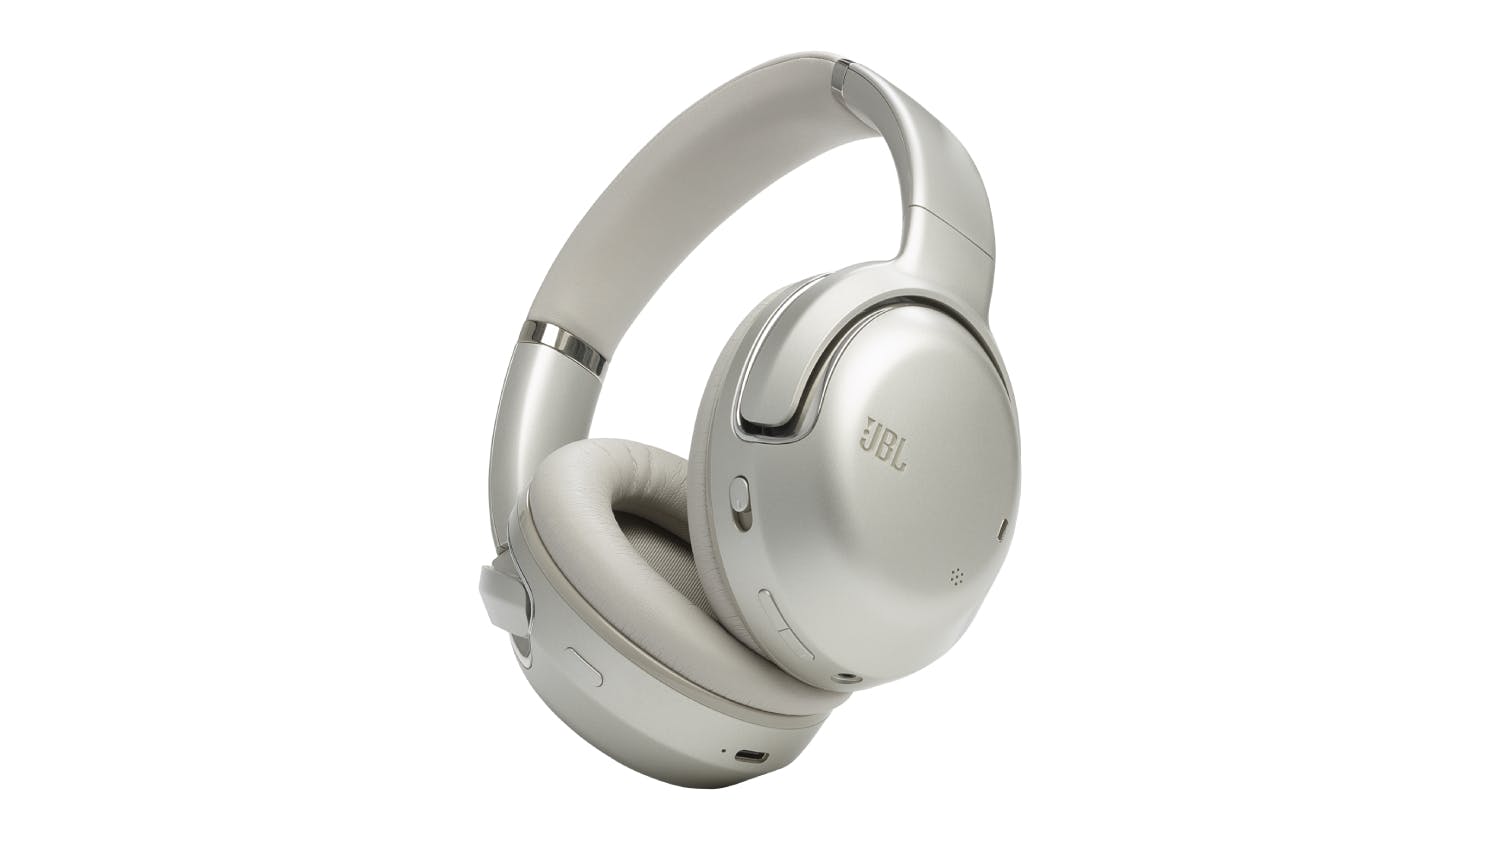 JBL Tour One M2 Wireless Over-ear Noise Cancelling Headphones (Champagne)